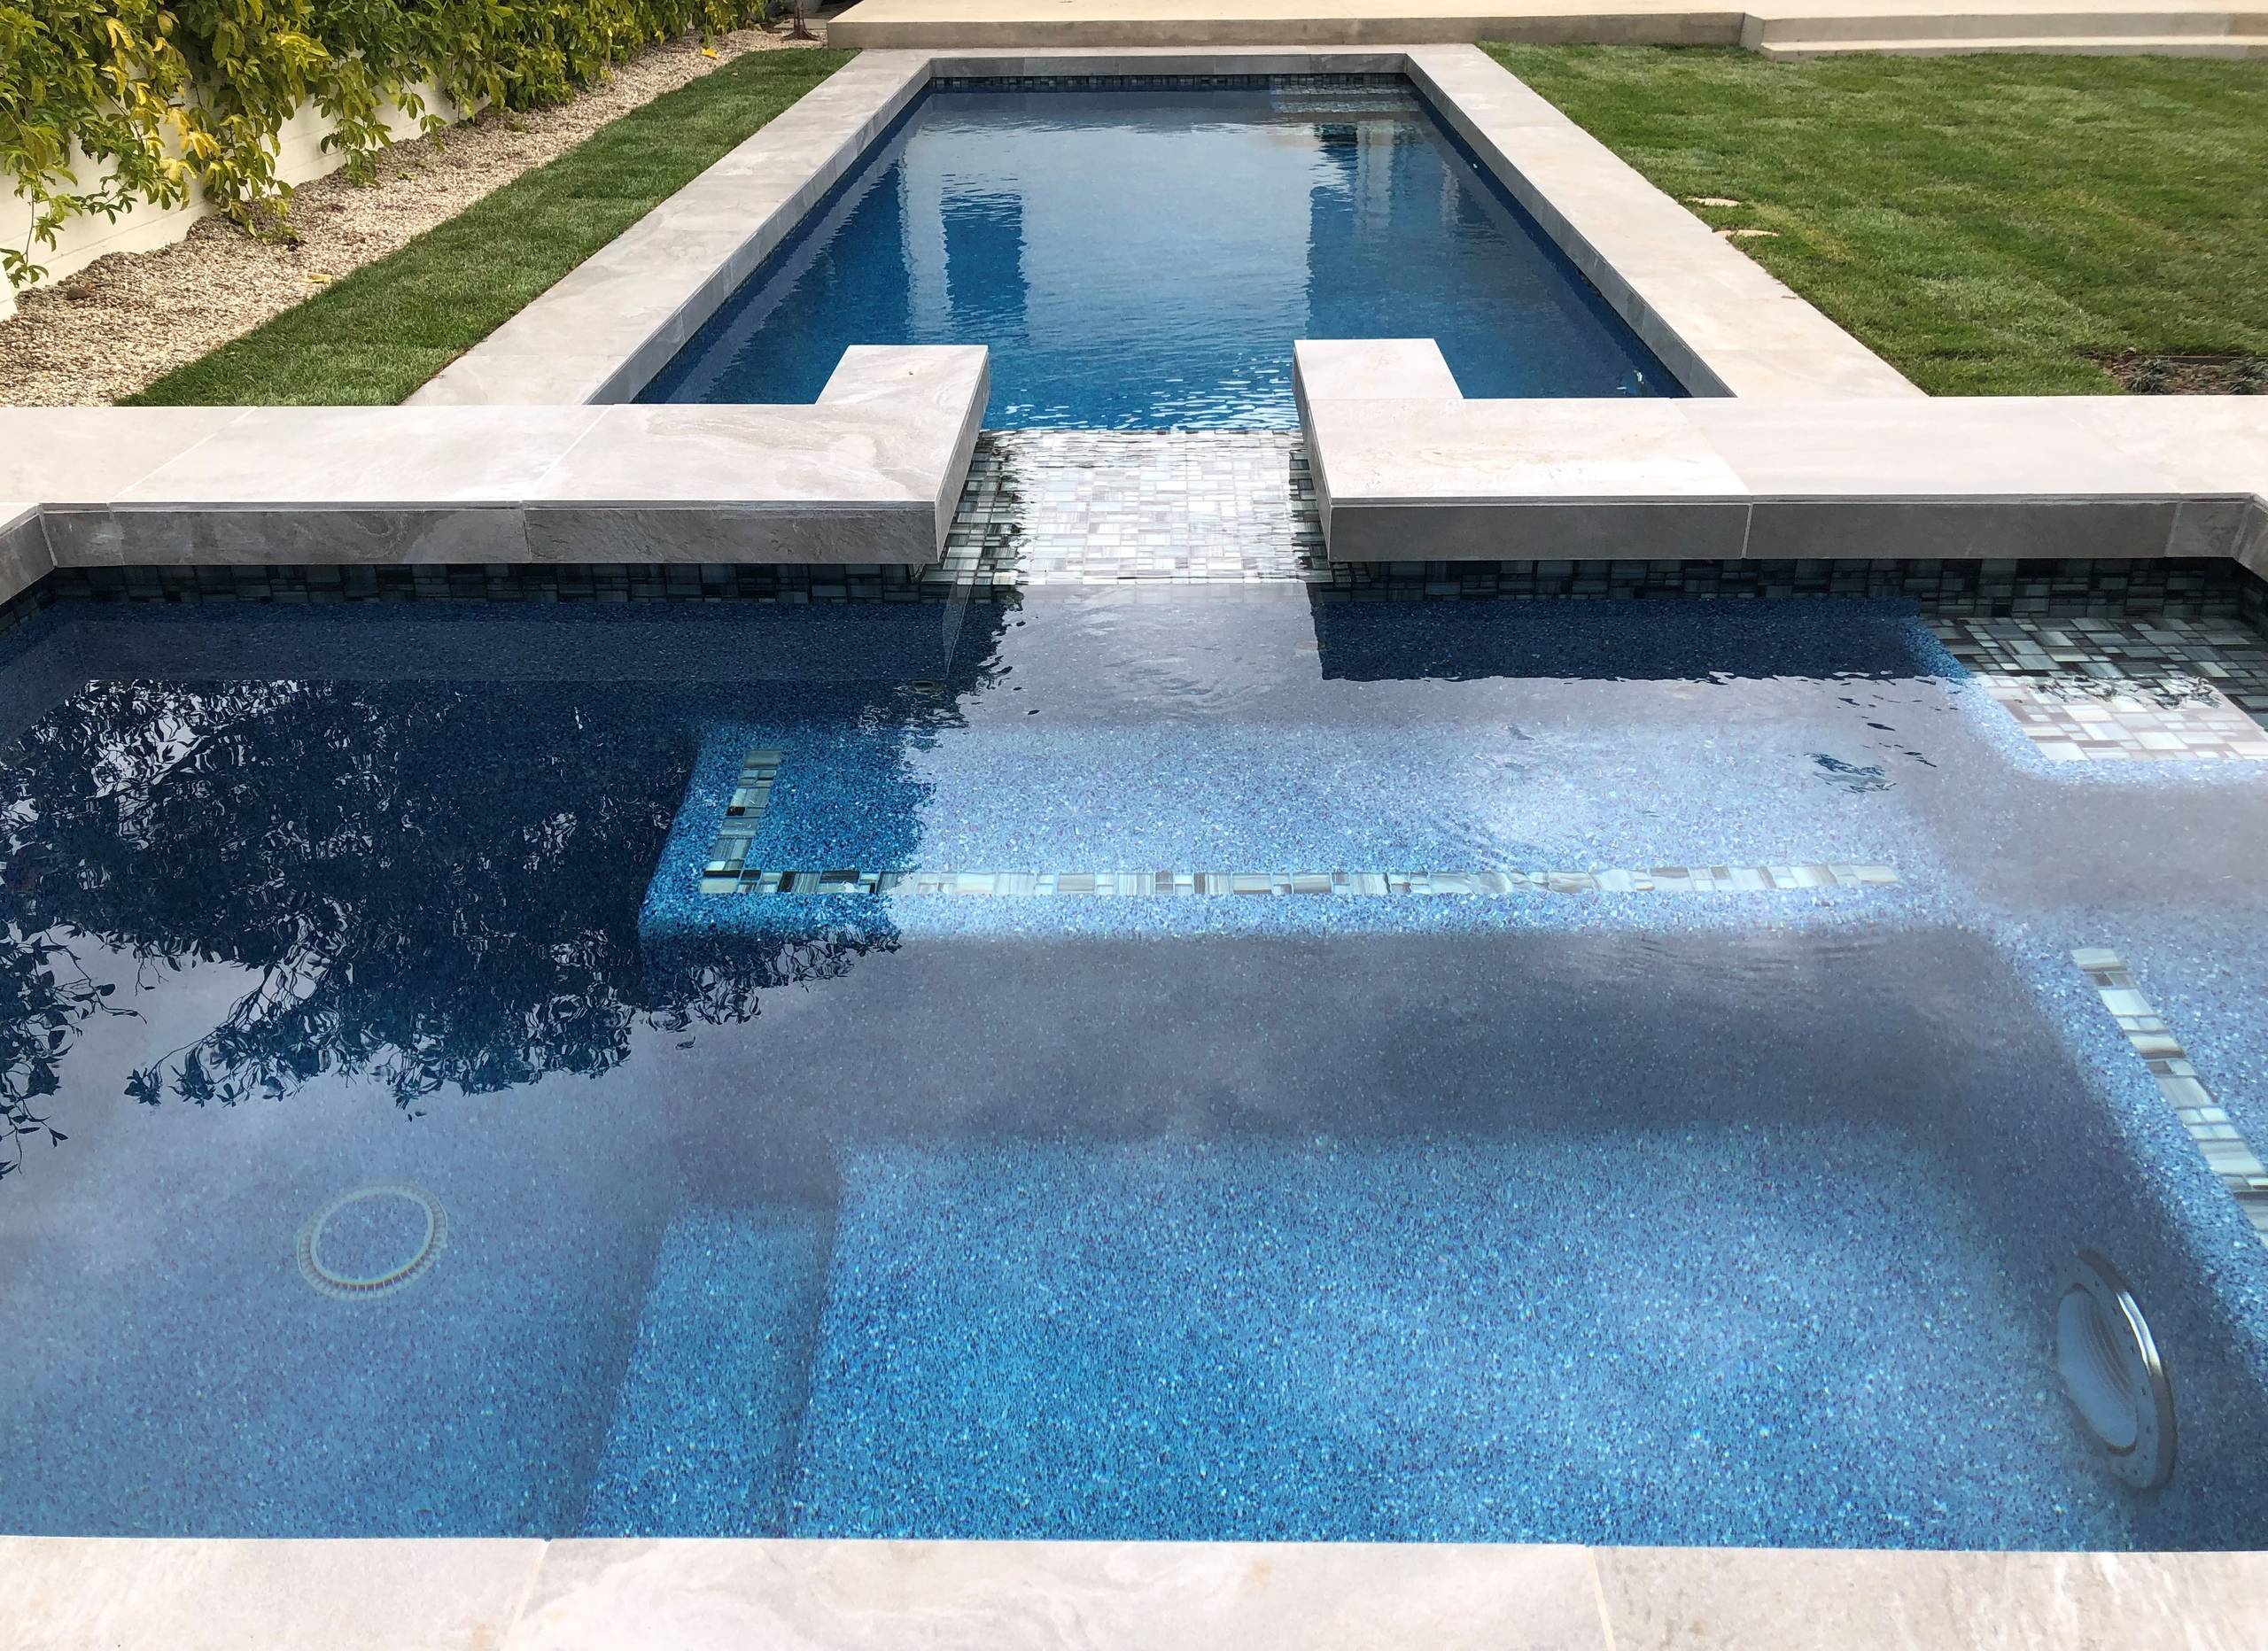 West Los Angeles - Contemporary Pool Remodel & New Spa